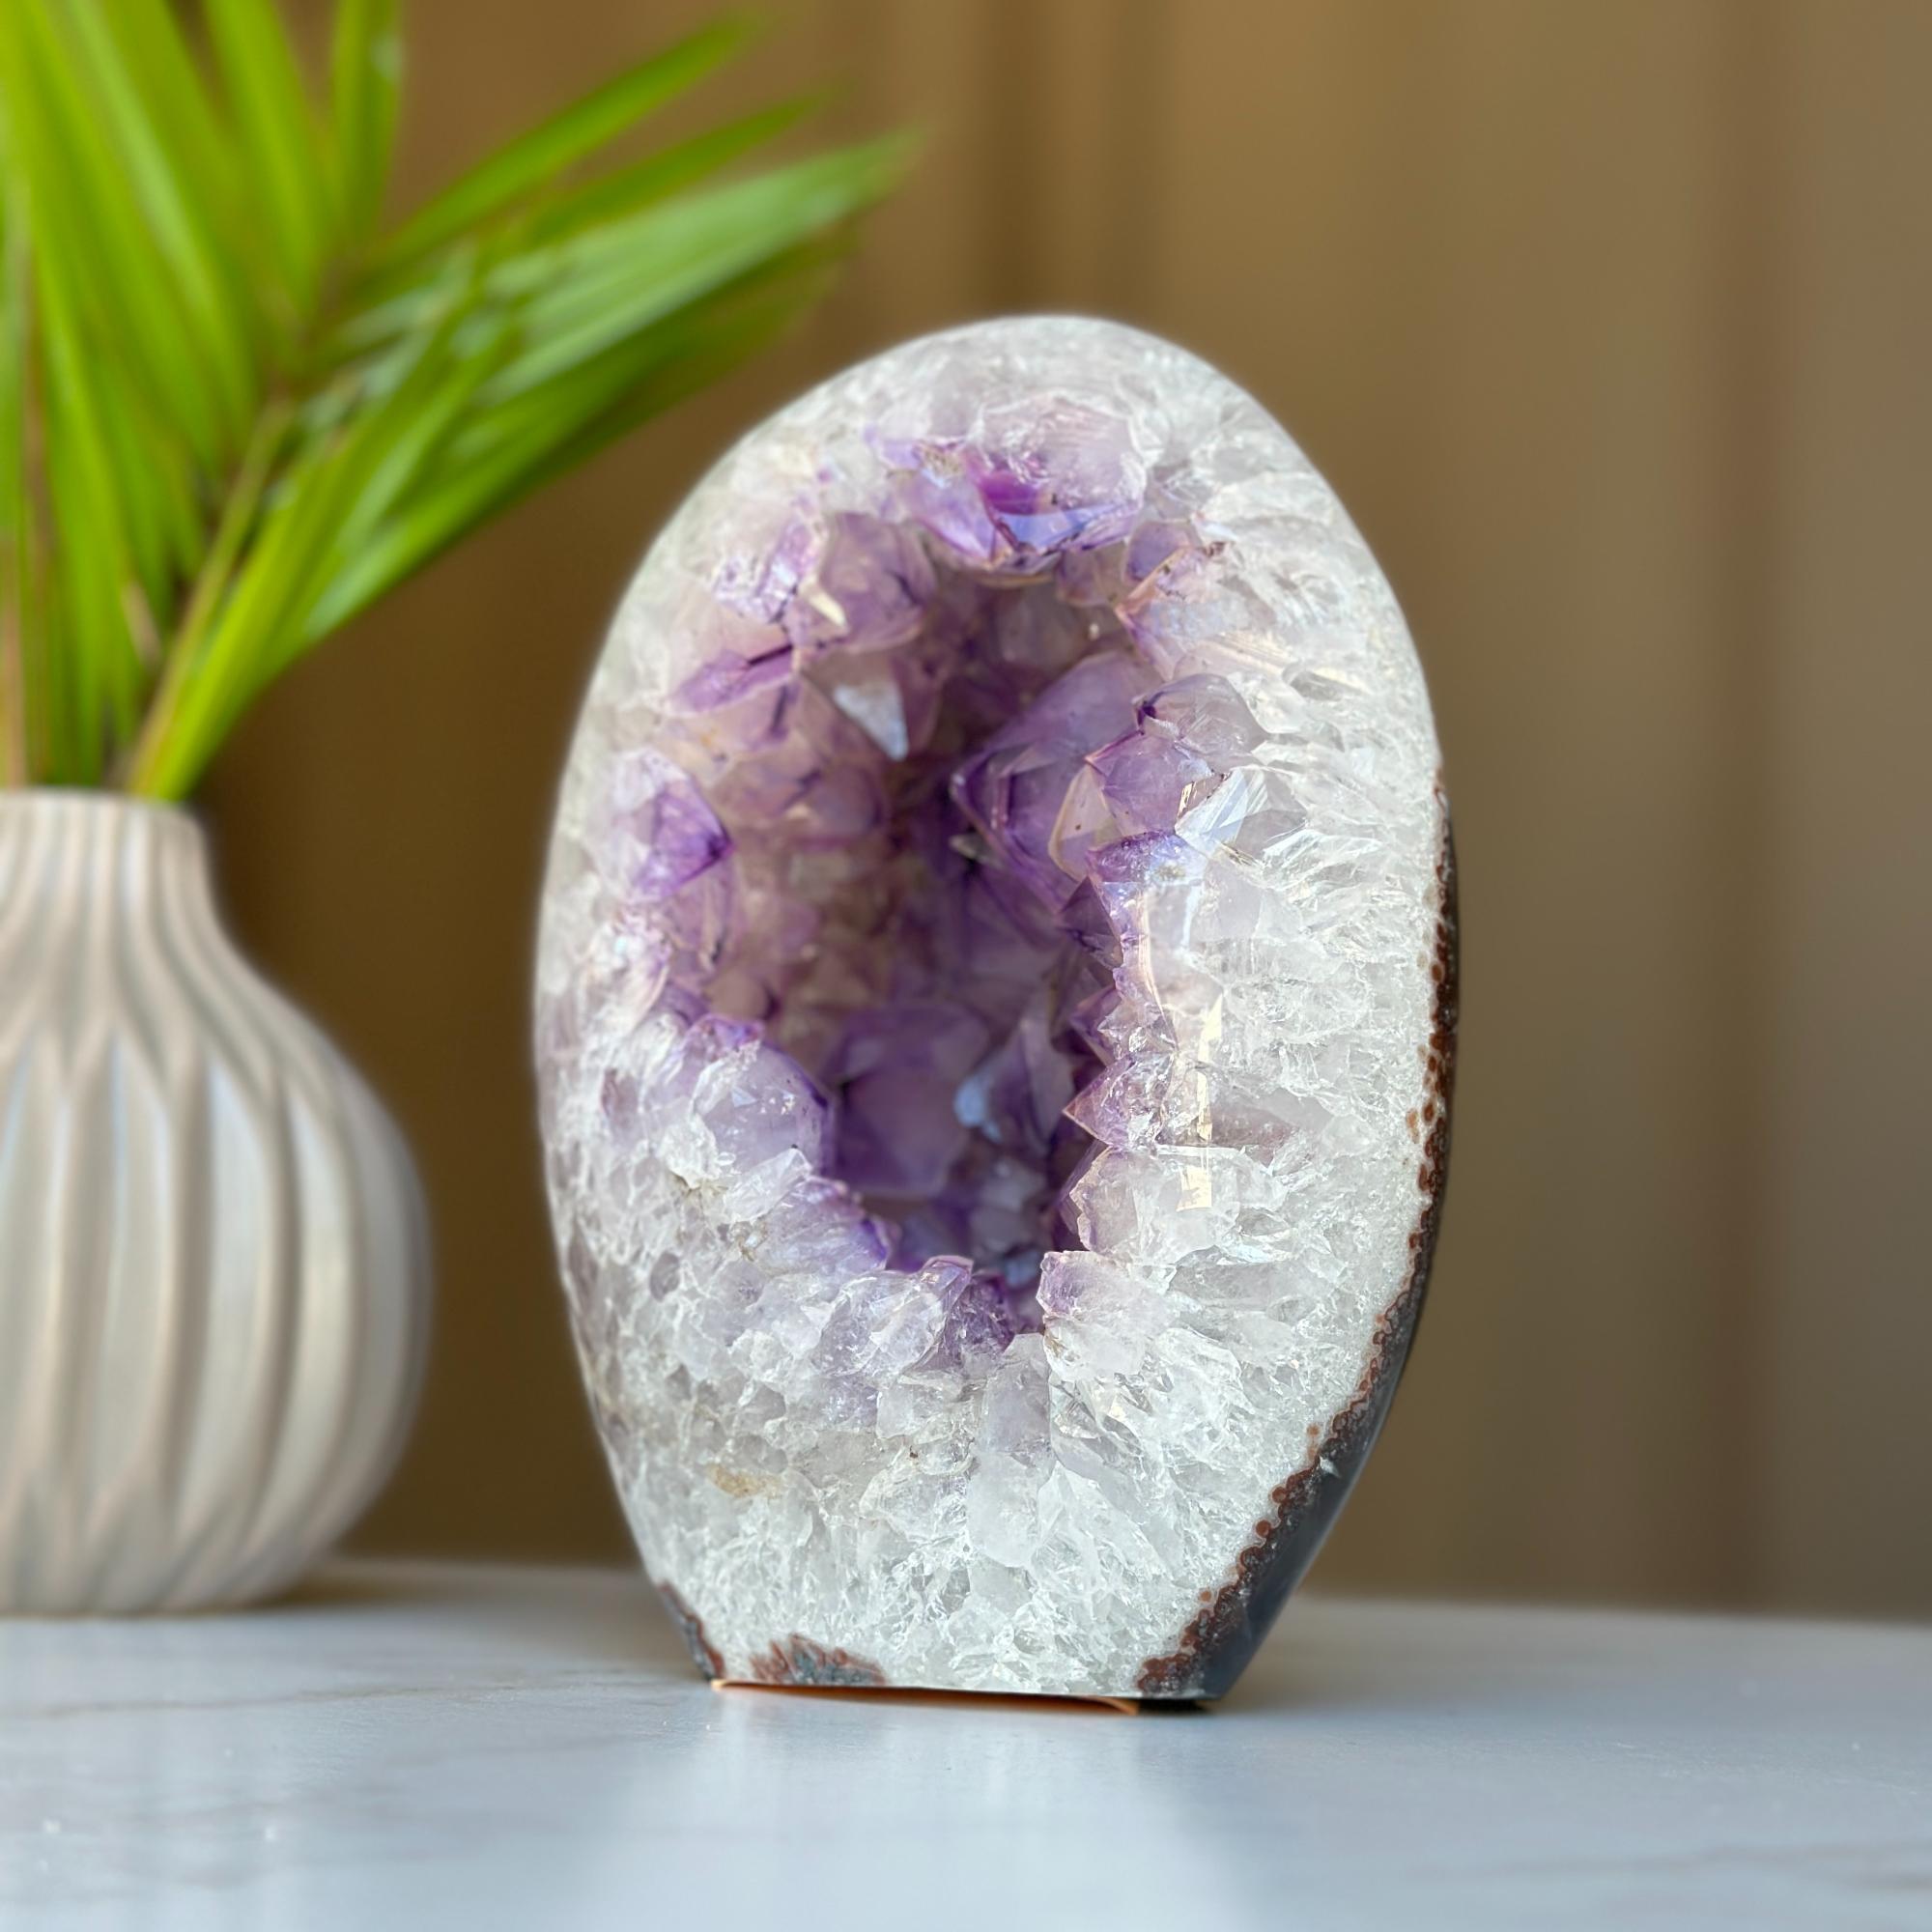 Superb Amethyst Geode, Large Cave Egg shaped, full of colors for collectors, 7 in Tall Full polished stone, Stunning decor AAA Crystal no